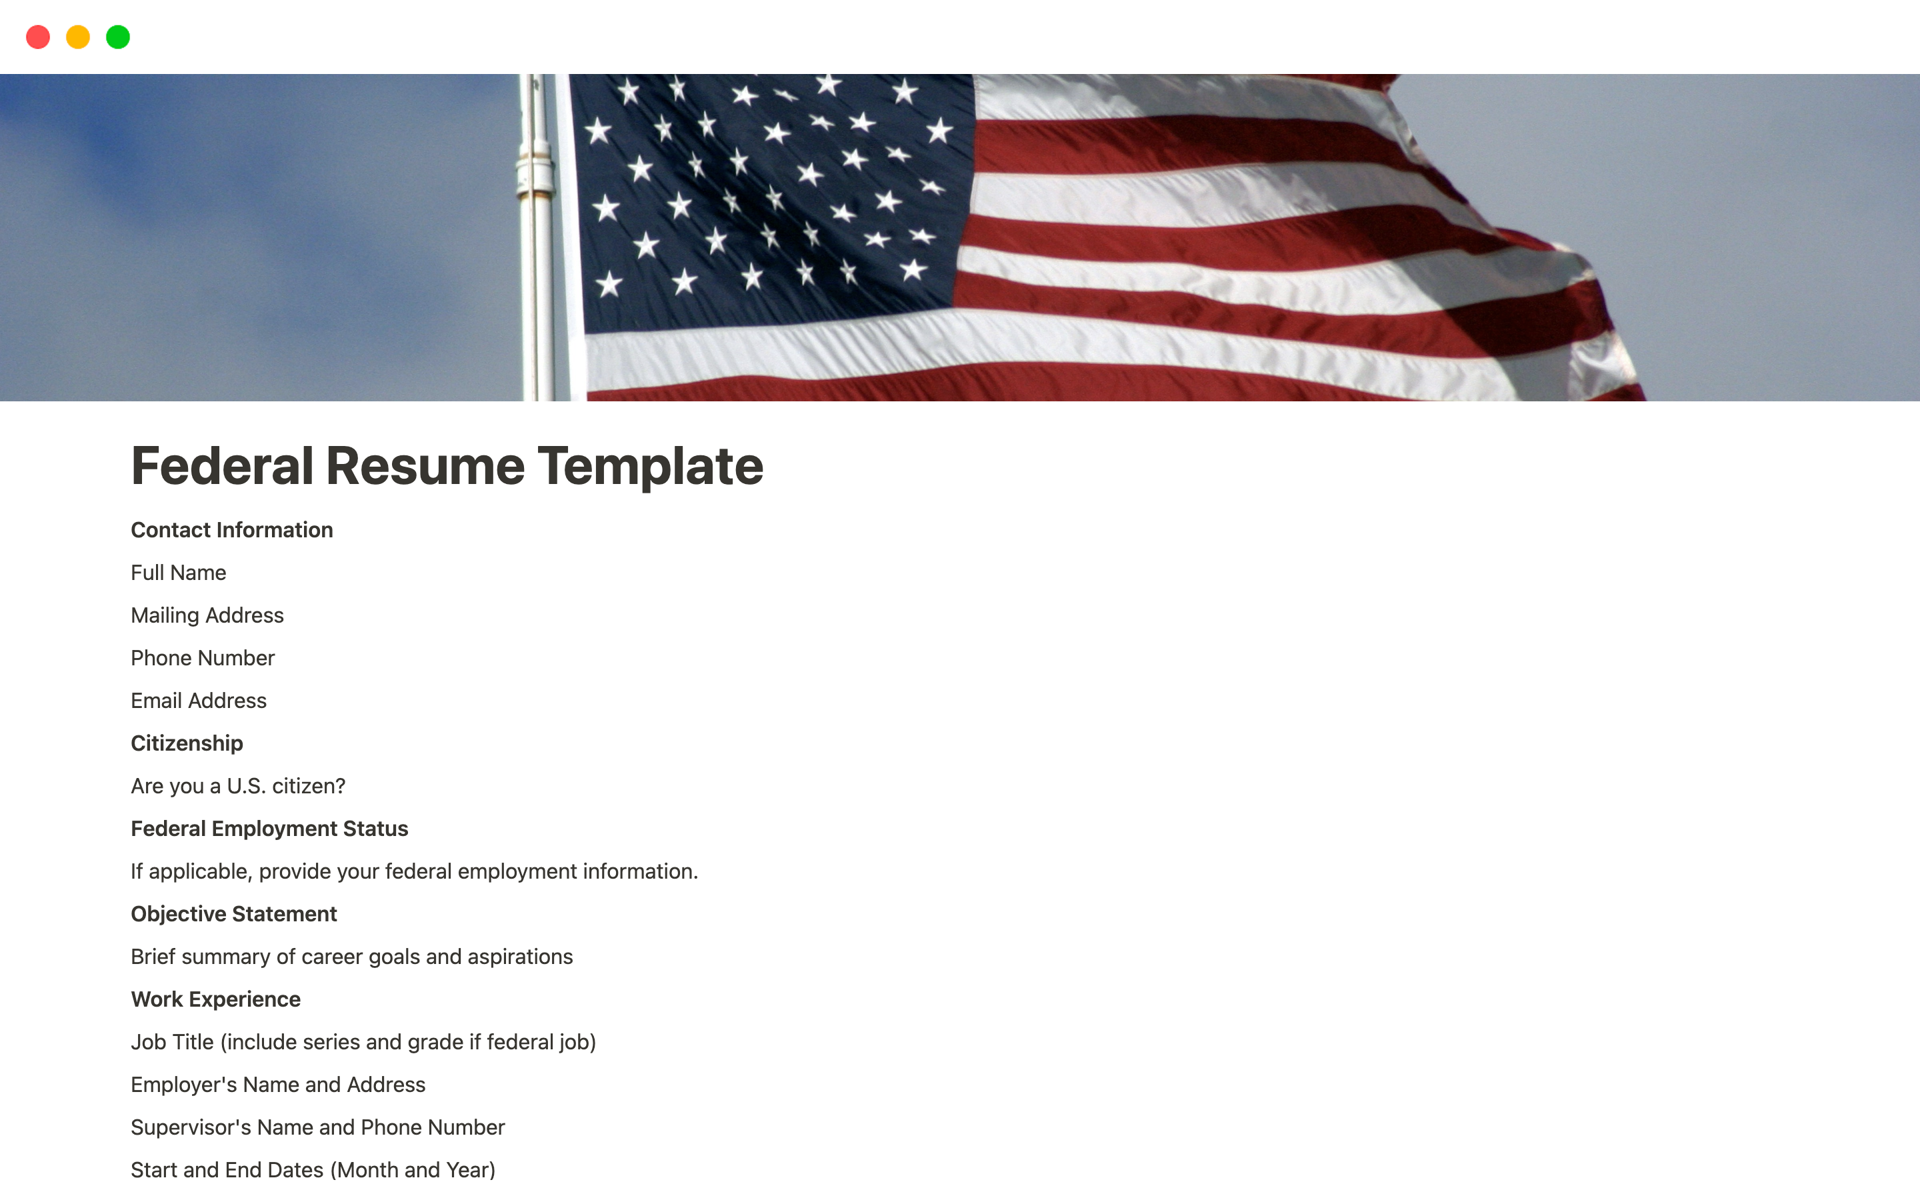 A template preview for Federal Resume